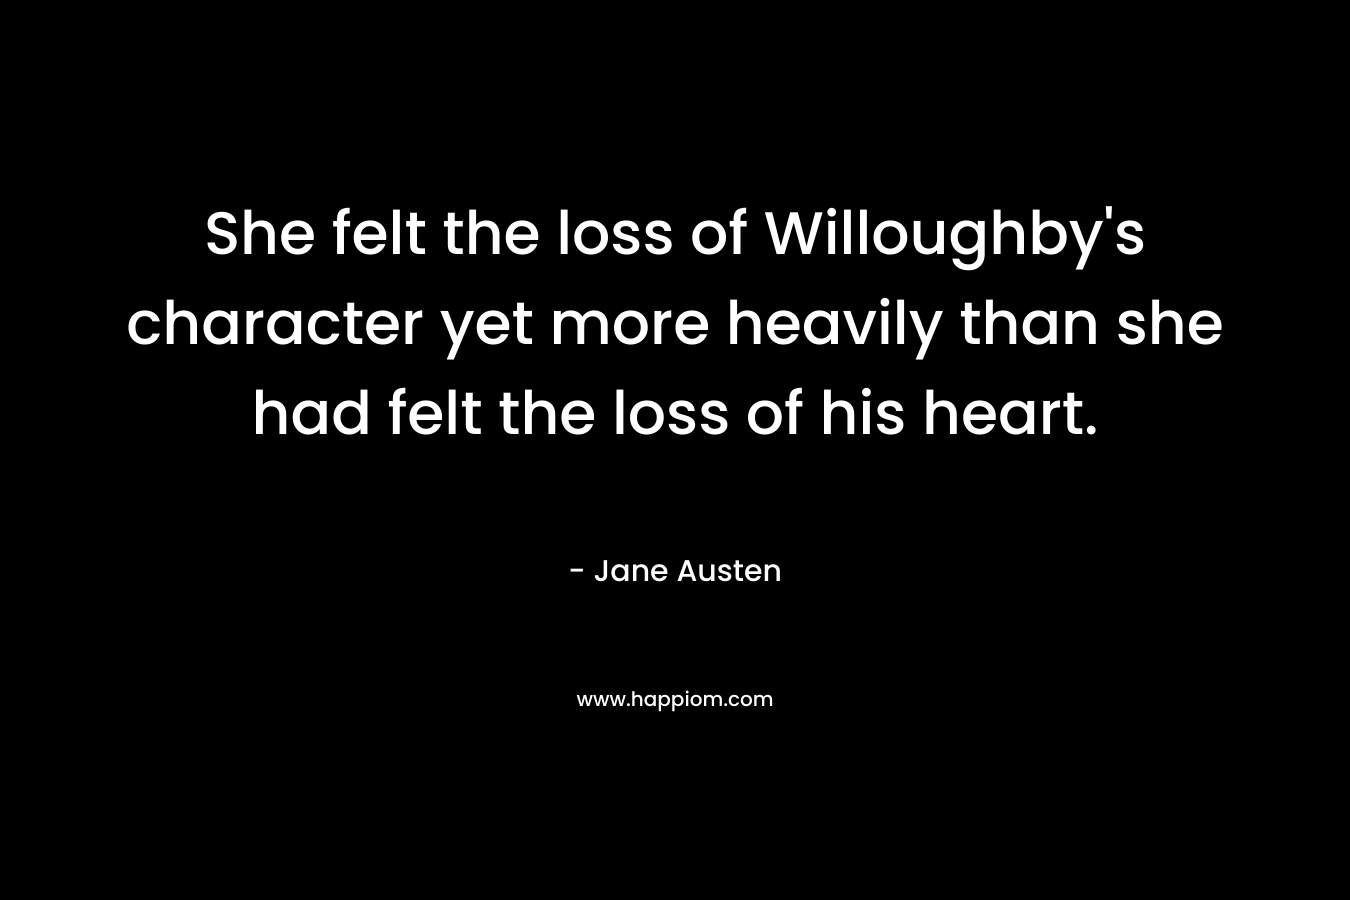 She felt the loss of Willoughby's character yet more heavily than she had felt the loss of his heart.